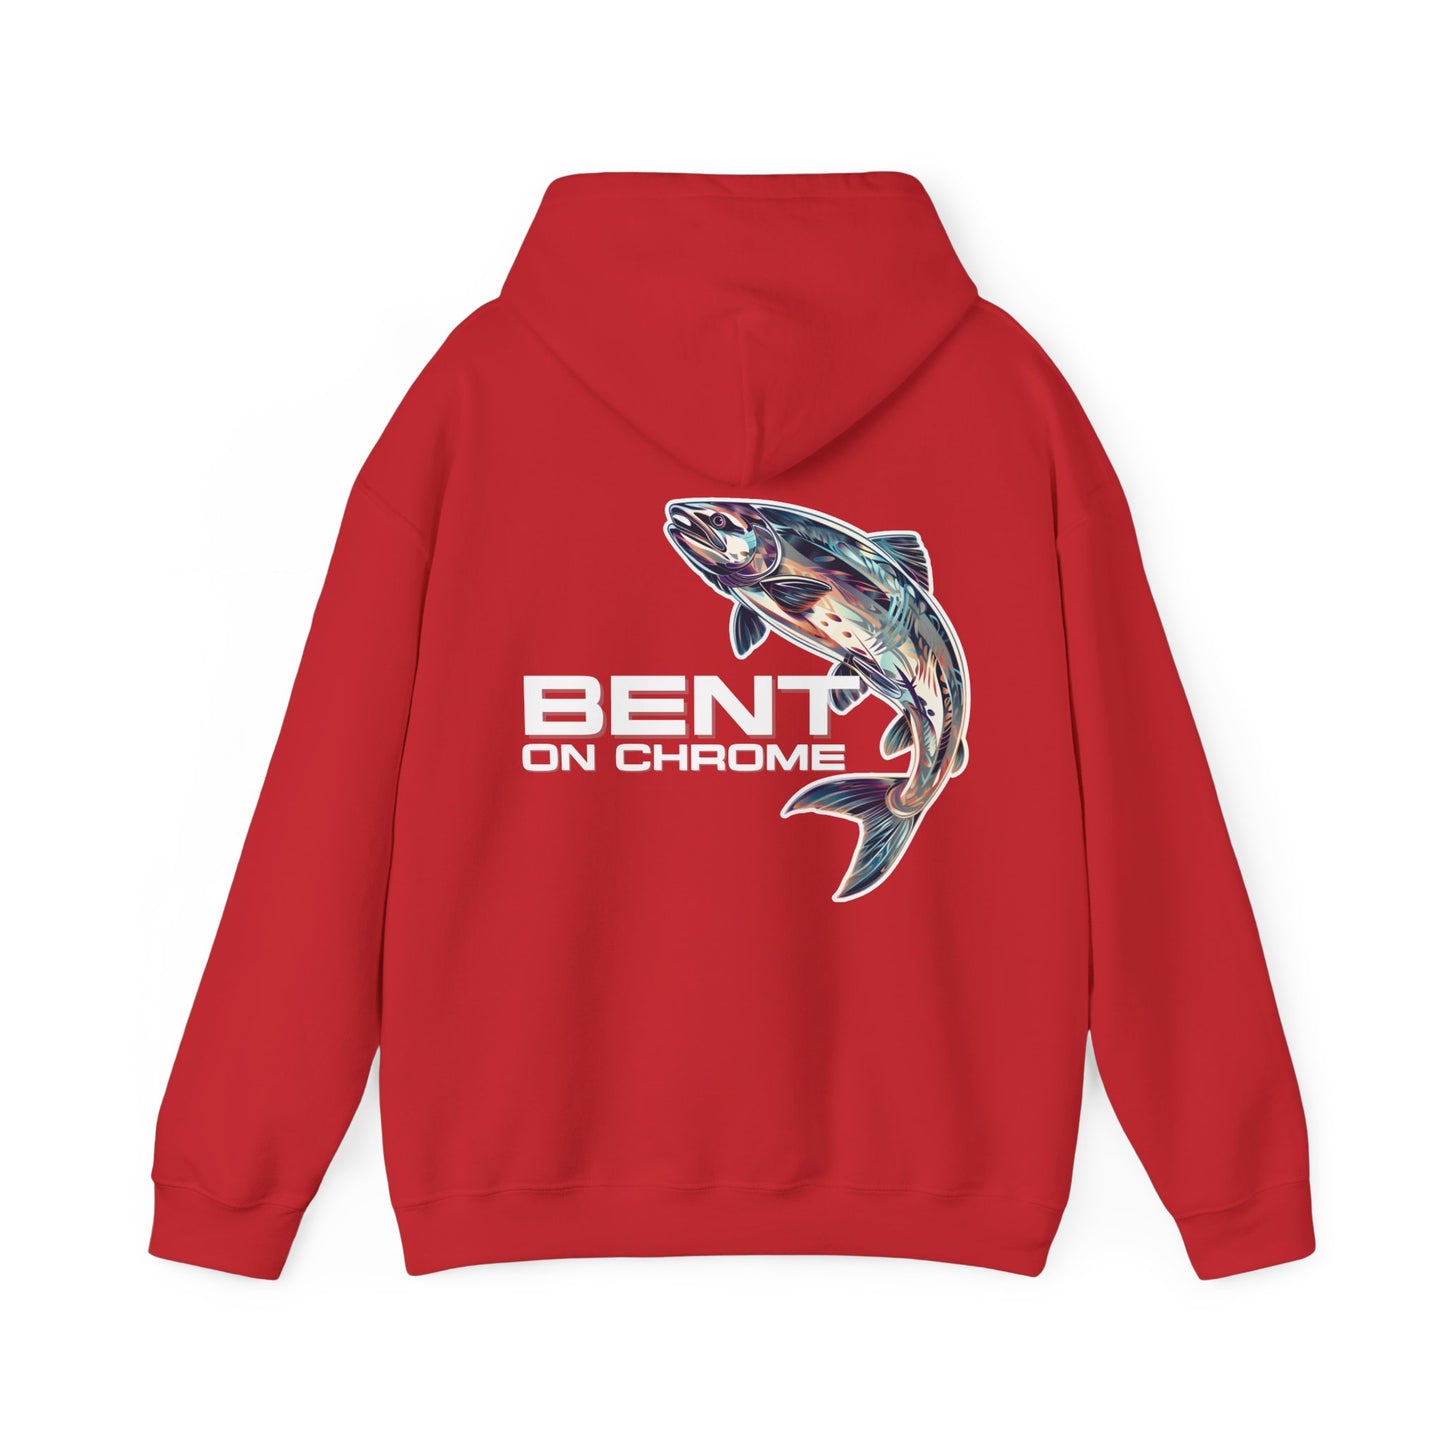 Bent On Chrome - Silver Salmon - Cotton/Poly Blend Hoodie